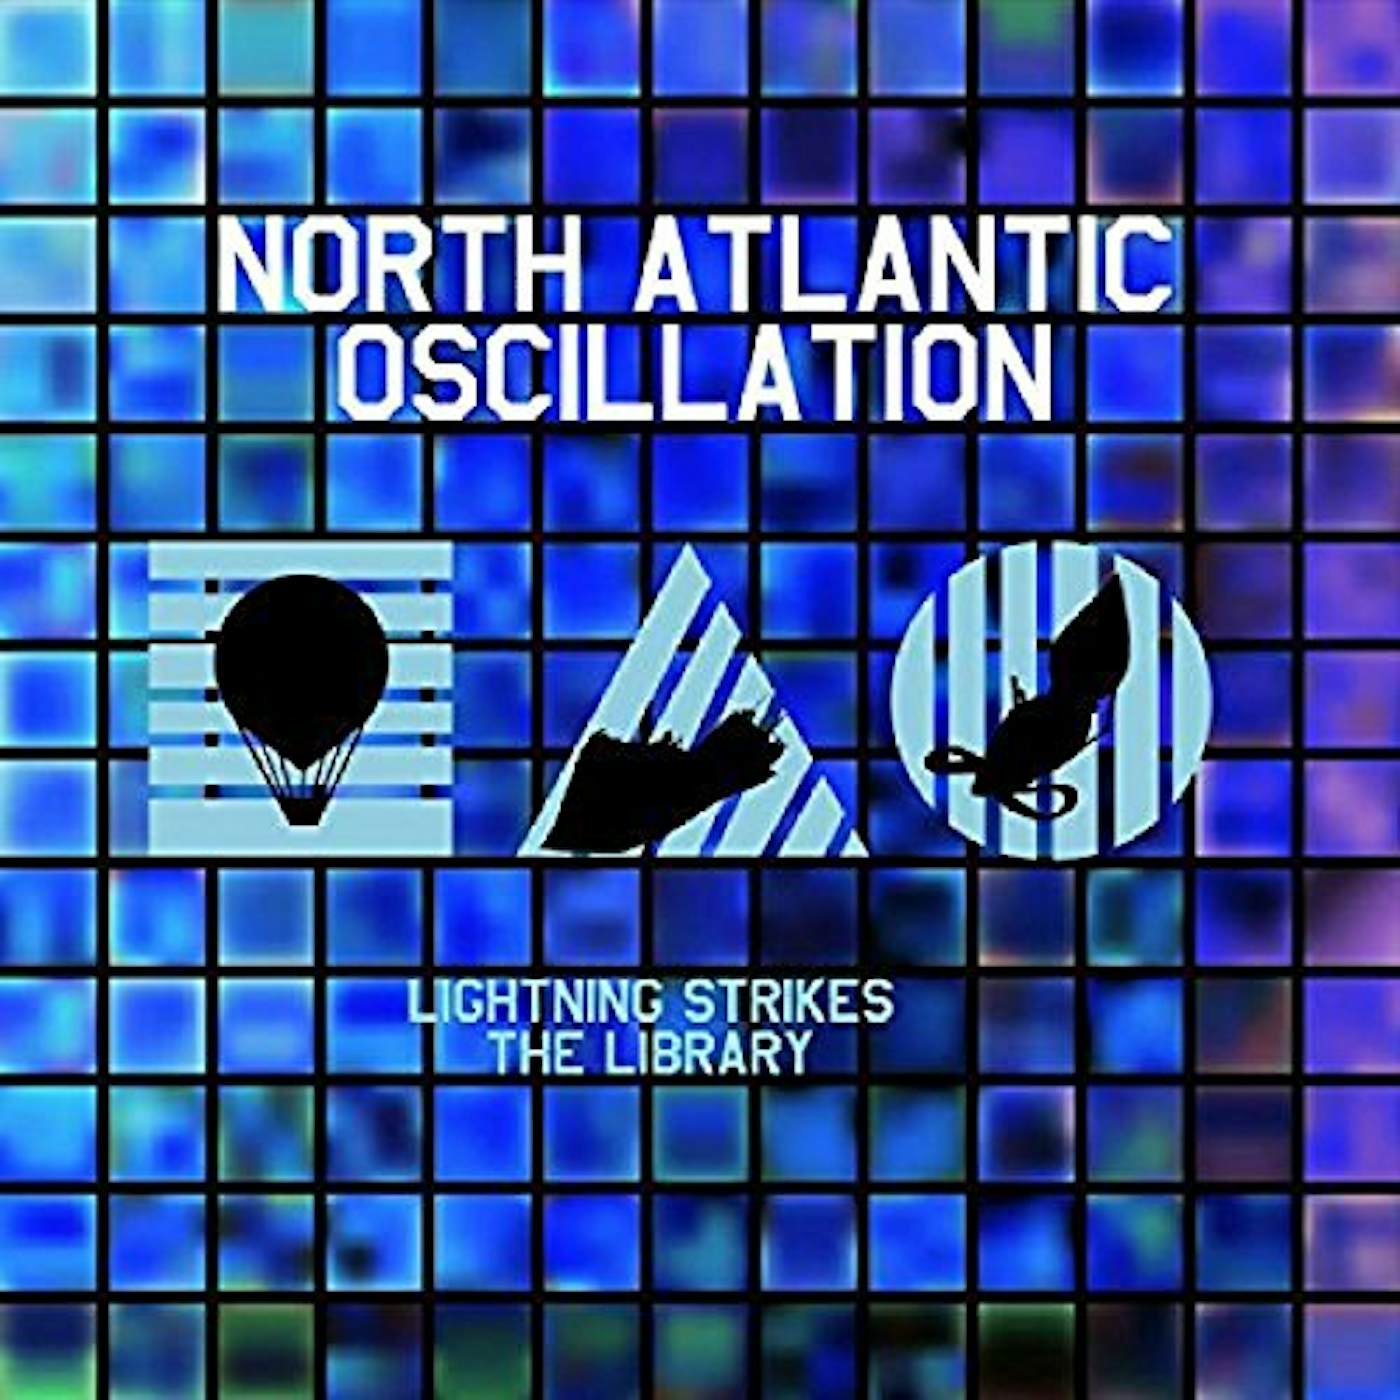 North Atlantic Oscillation LIGHTNING STRIKES THE LIBRARY - A COLLECTION CD